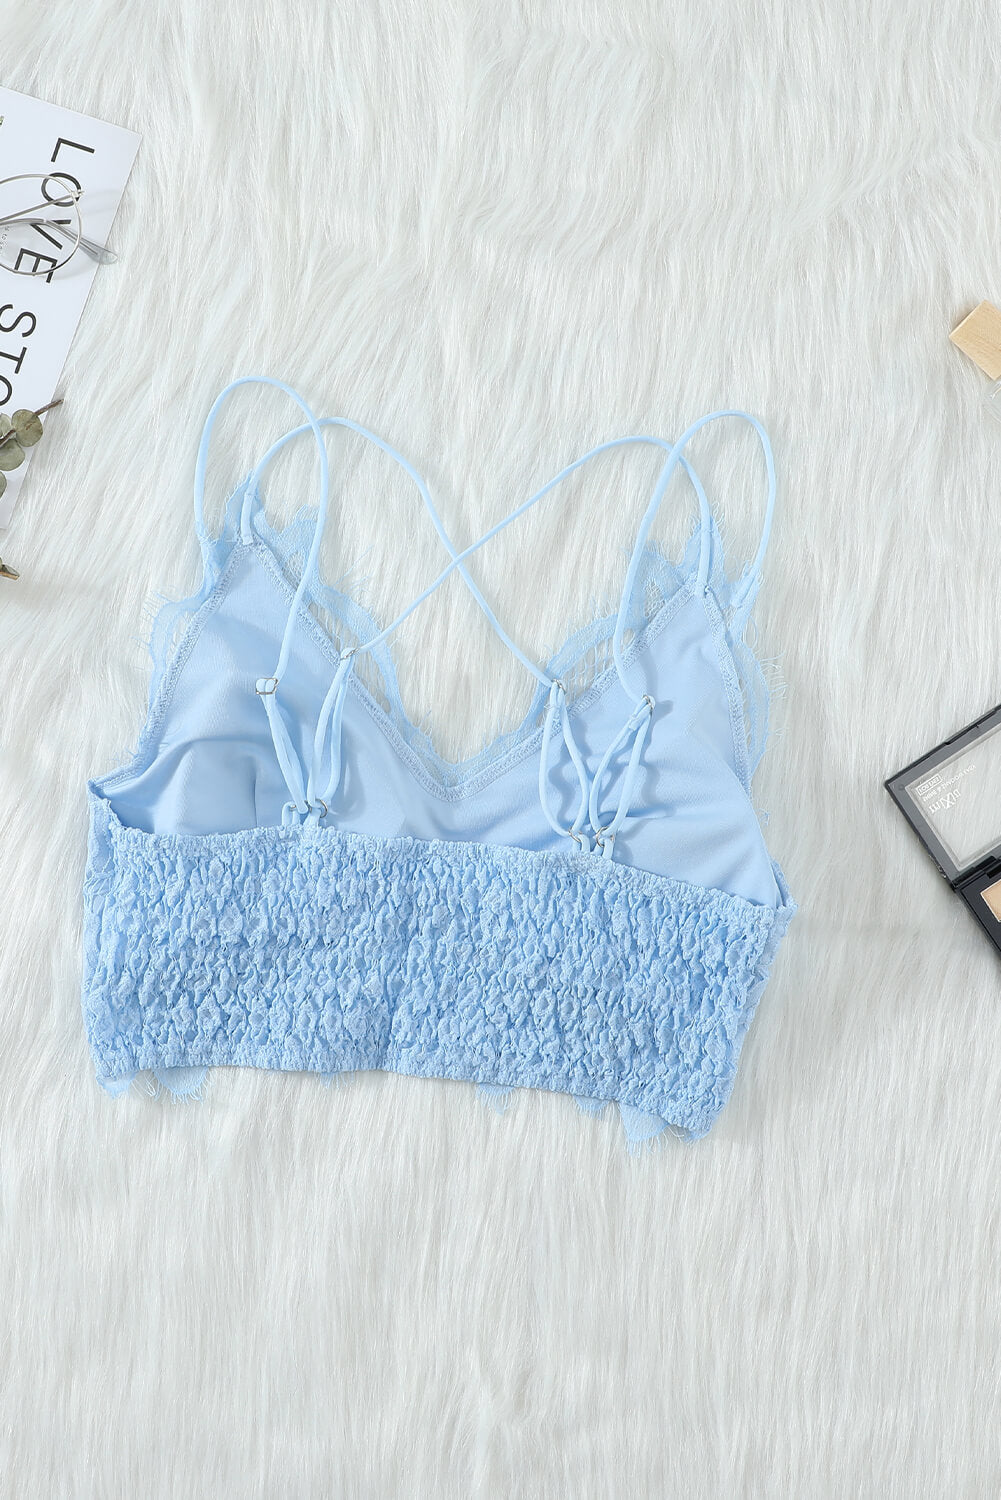 Chic Sky Blue Lace Bralette with Lining